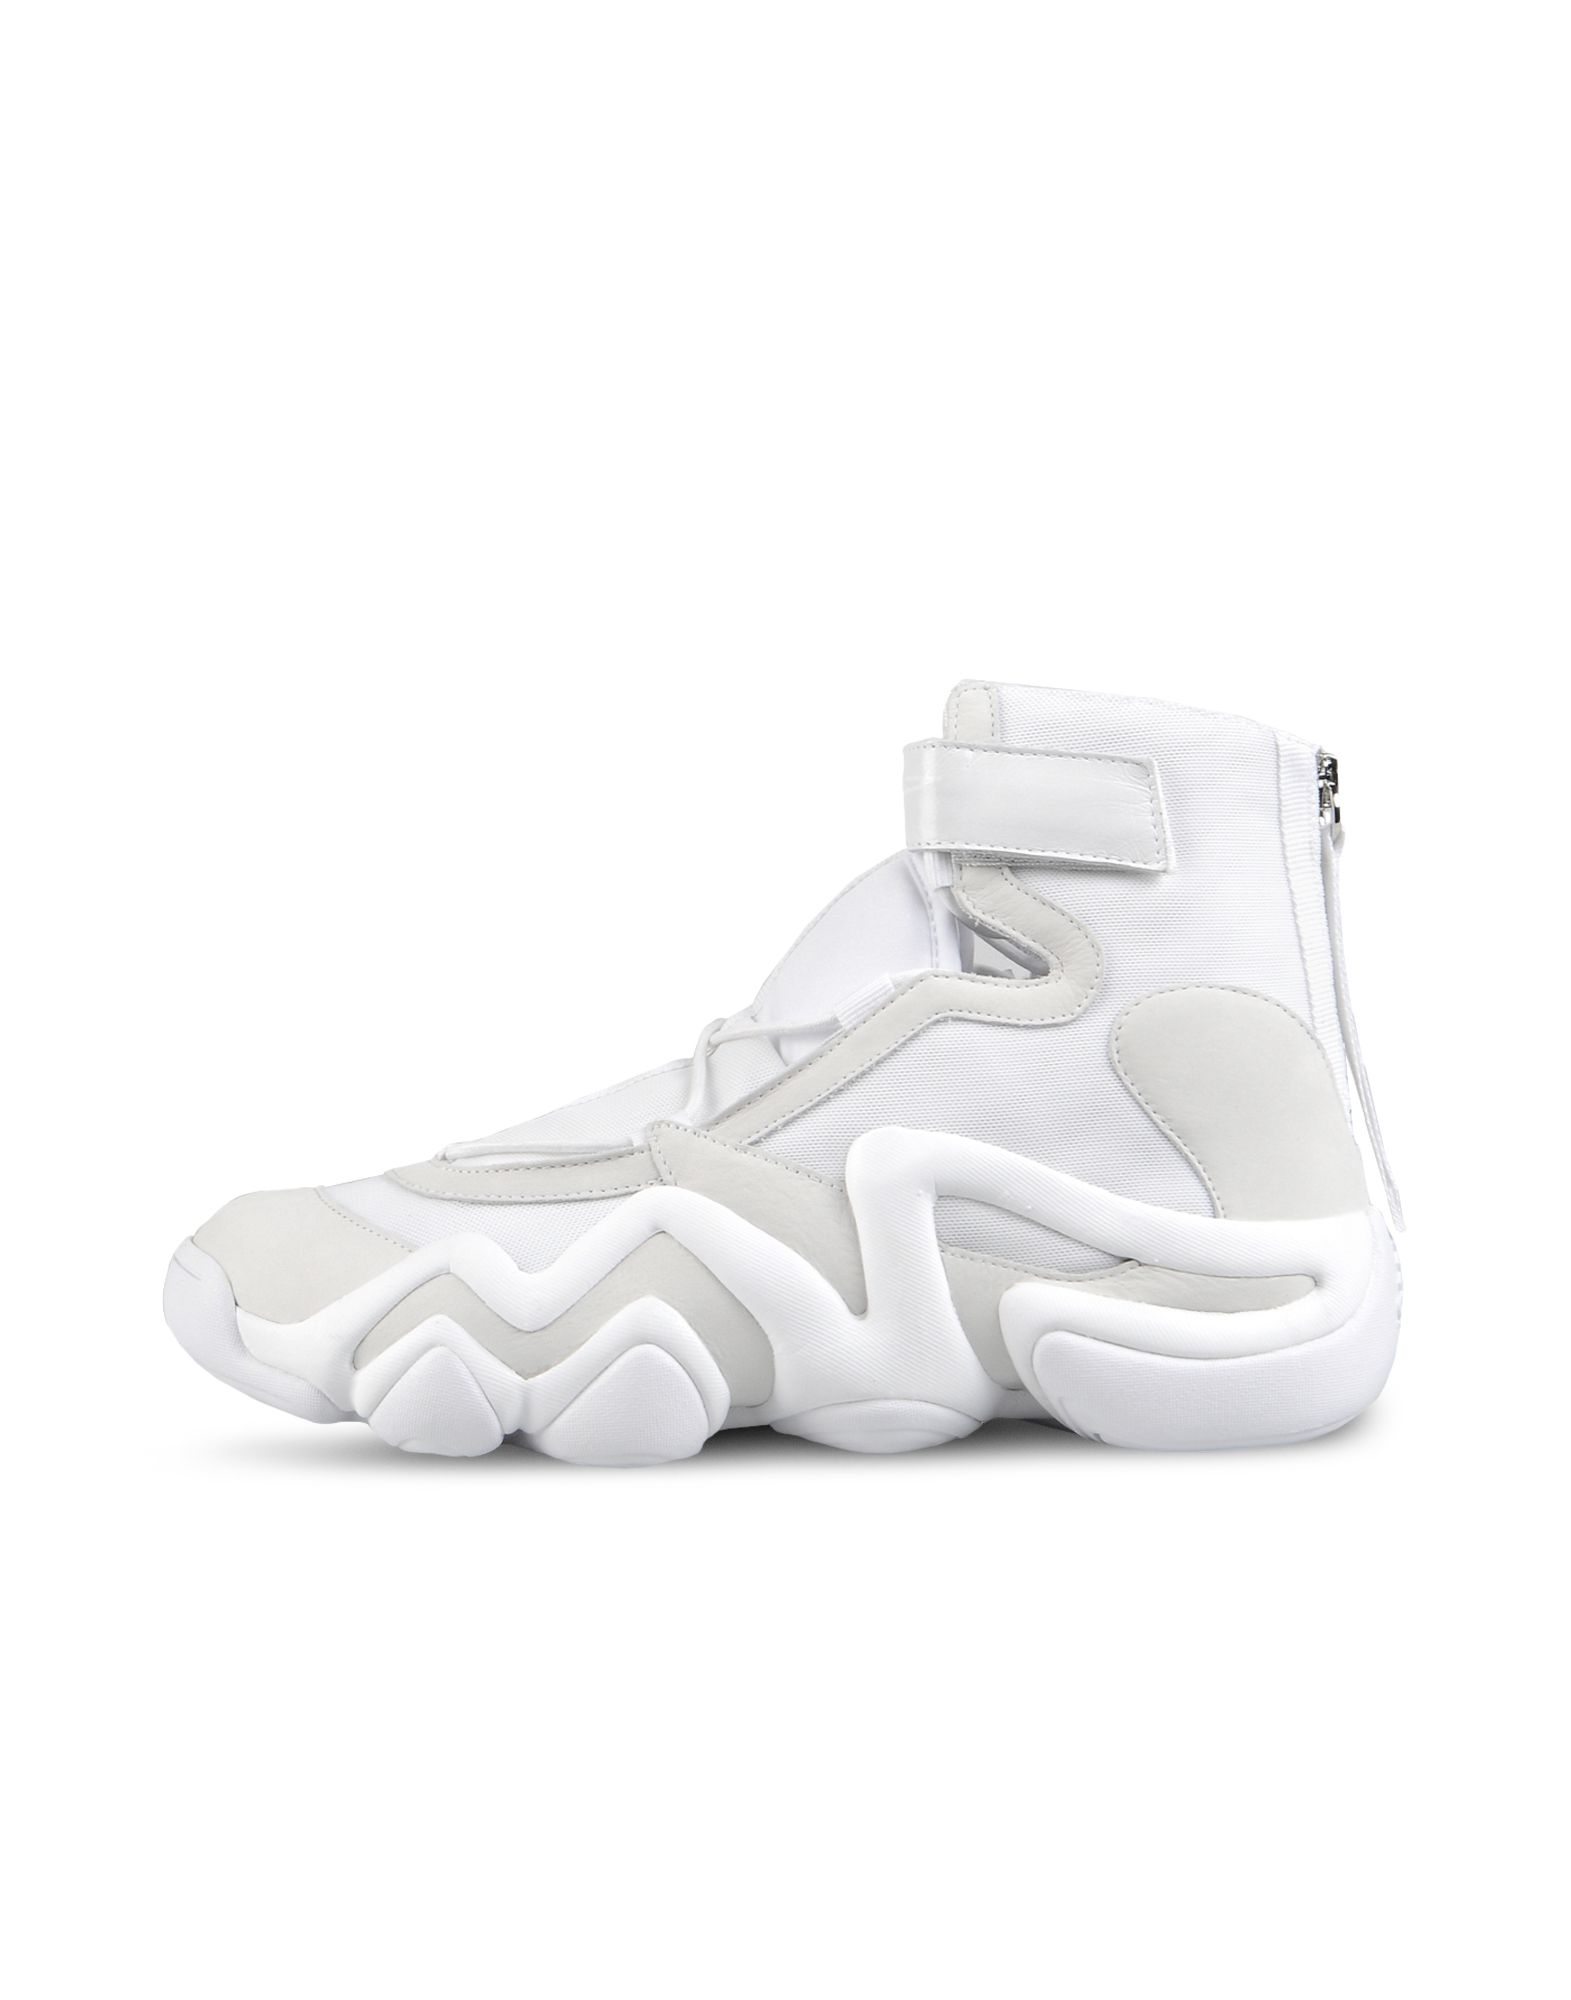 YY STRAP BBALL MID Trainers | Adidas Y-3 Official Store